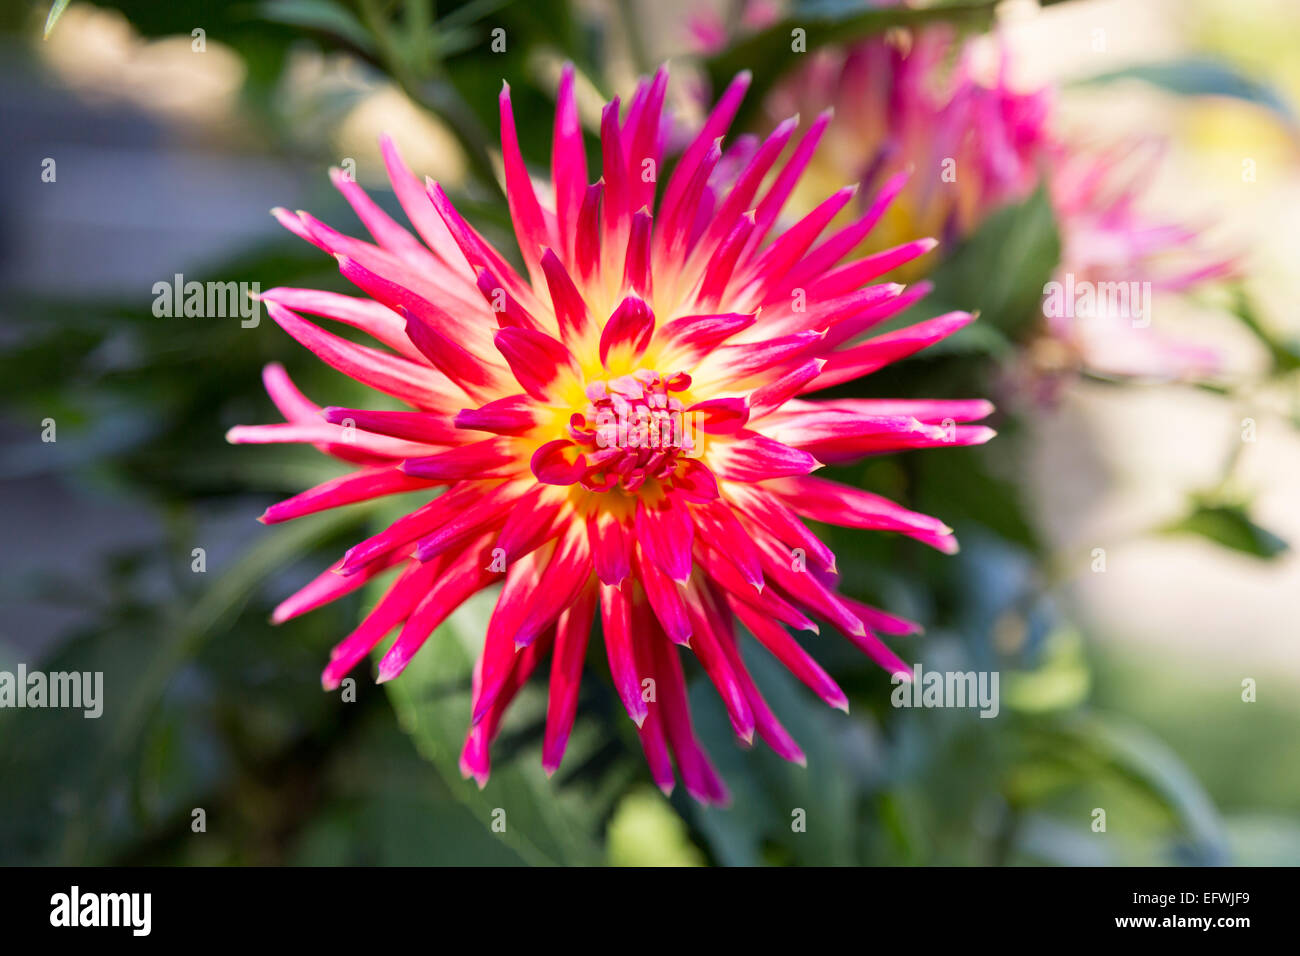 Bright Pink, Red & Yellow Cactus Dahlia in an English Garden, Autumn time. This plant has flowered for many years reaching a height of 1 meter + Stock Photo